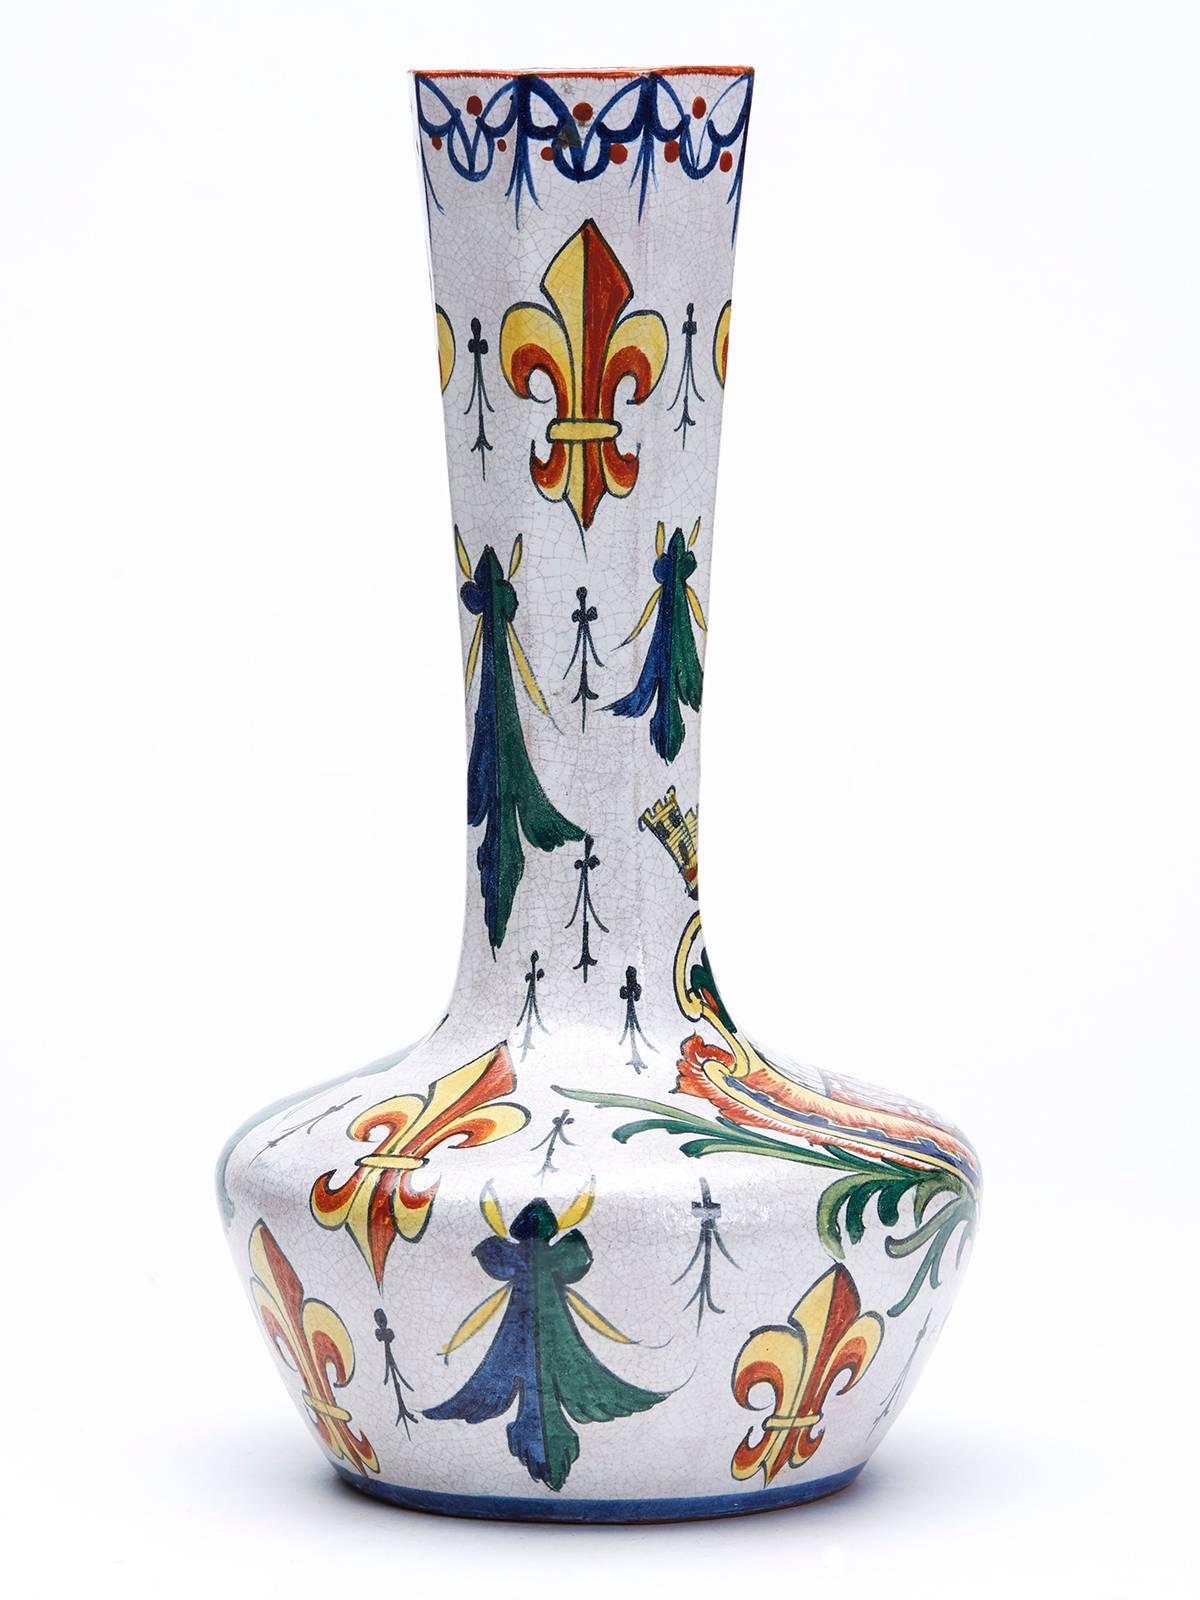 A fine antique continental pottery faience delft vase of bottle shape hand-painted in coloured enamels with an armorial crest and fleur de lys designs which may suggest that the vase is of French origin. This fine red earthenware vase has a squat